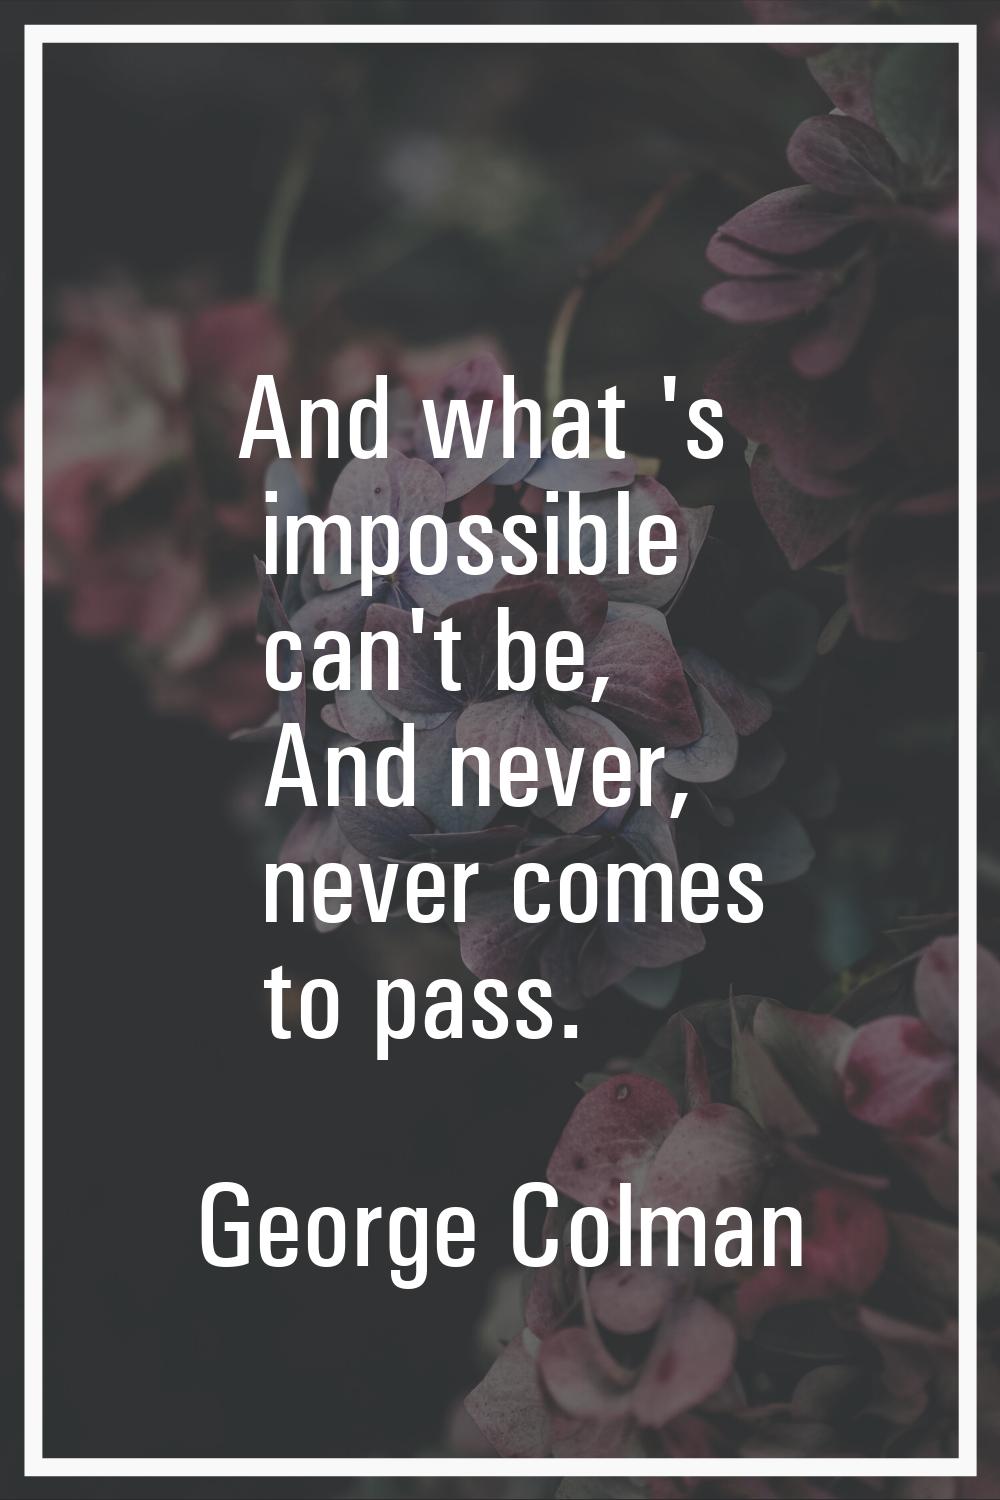 And what 's impossible can't be, And never, never comes to pass.